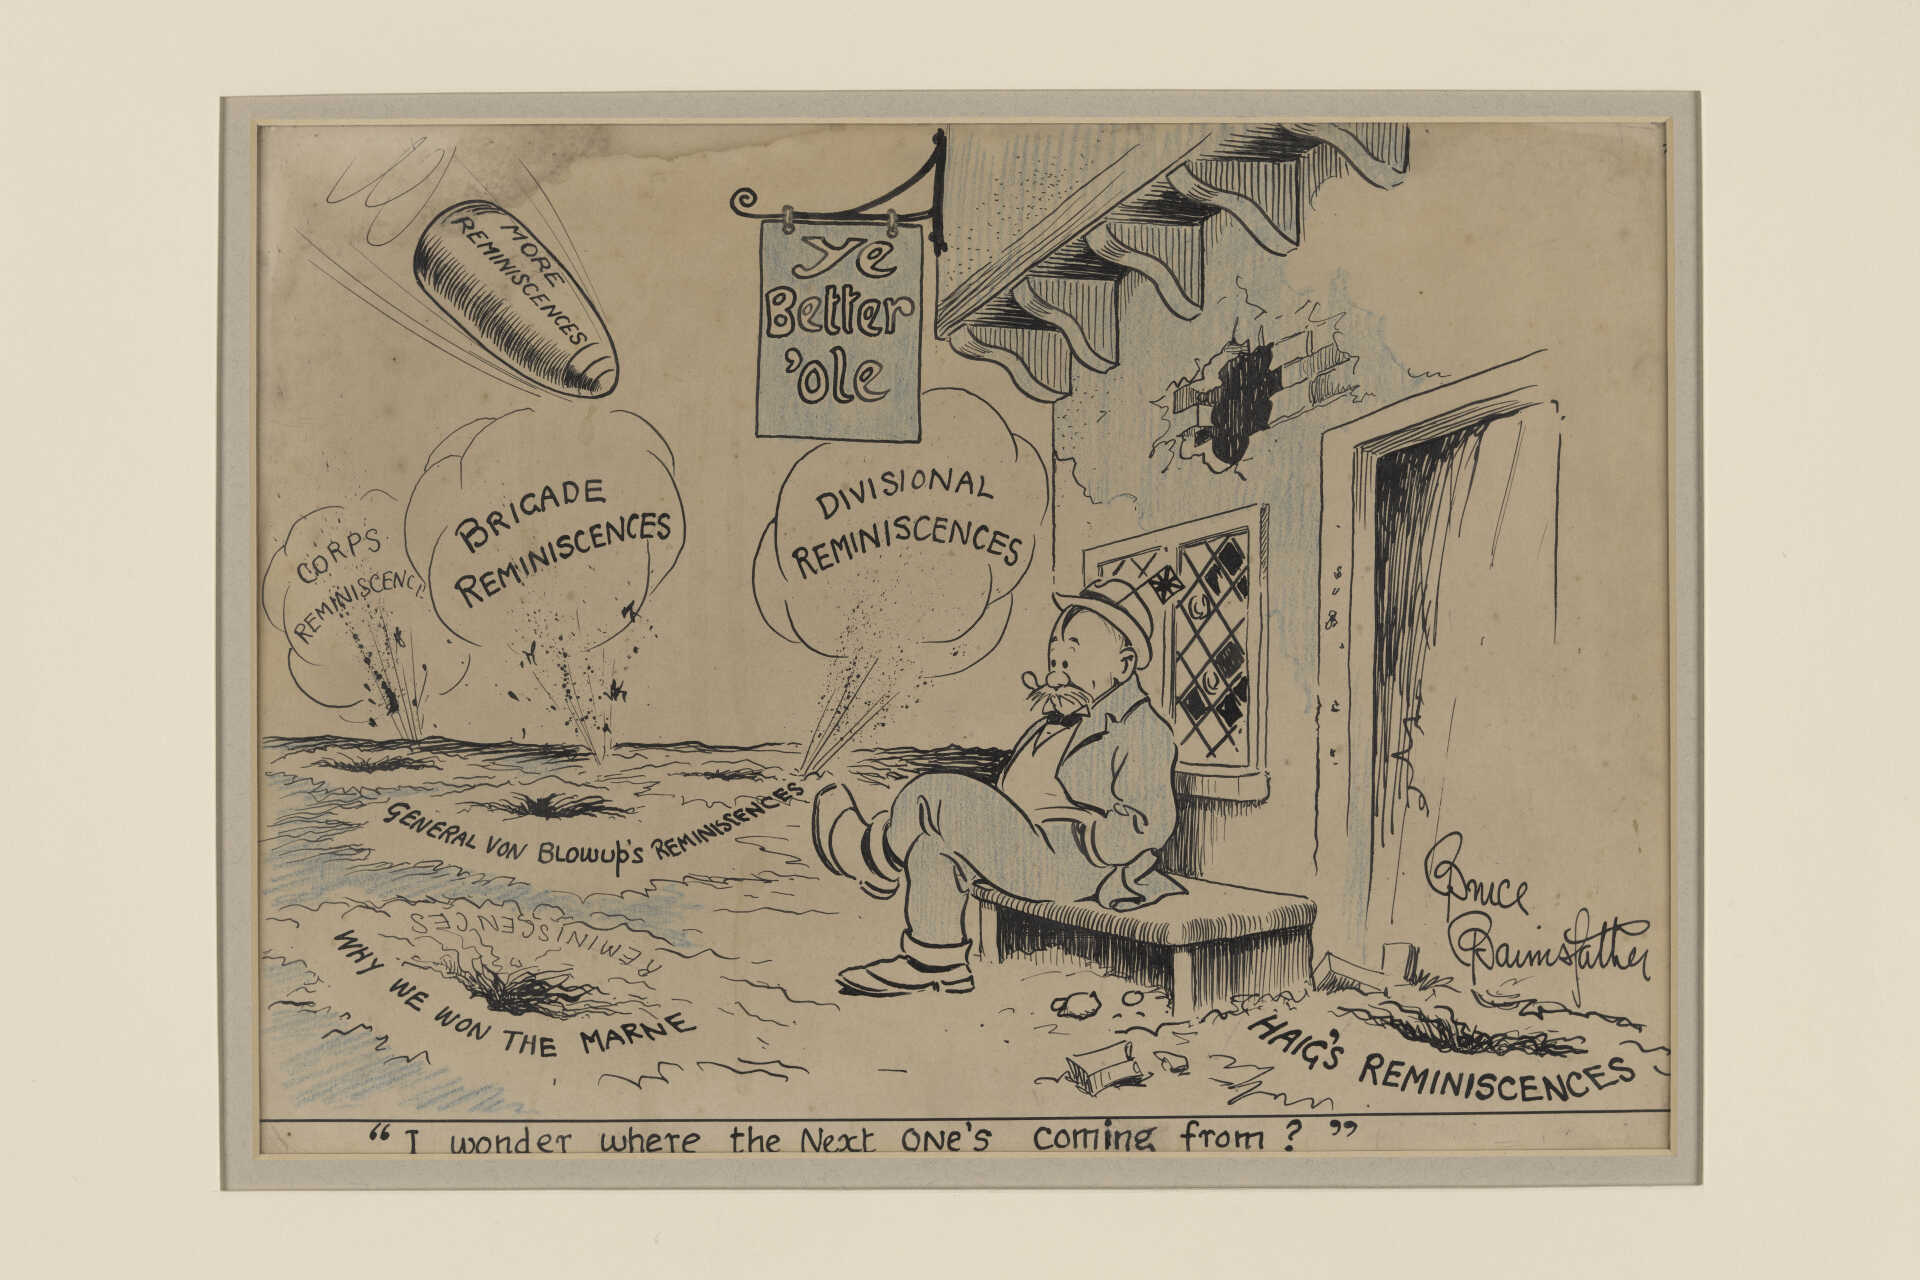 Photograph of an original artwork by Bruce Bairnsfather. It depicts the character of Old Bill sitting on a bench in wartime